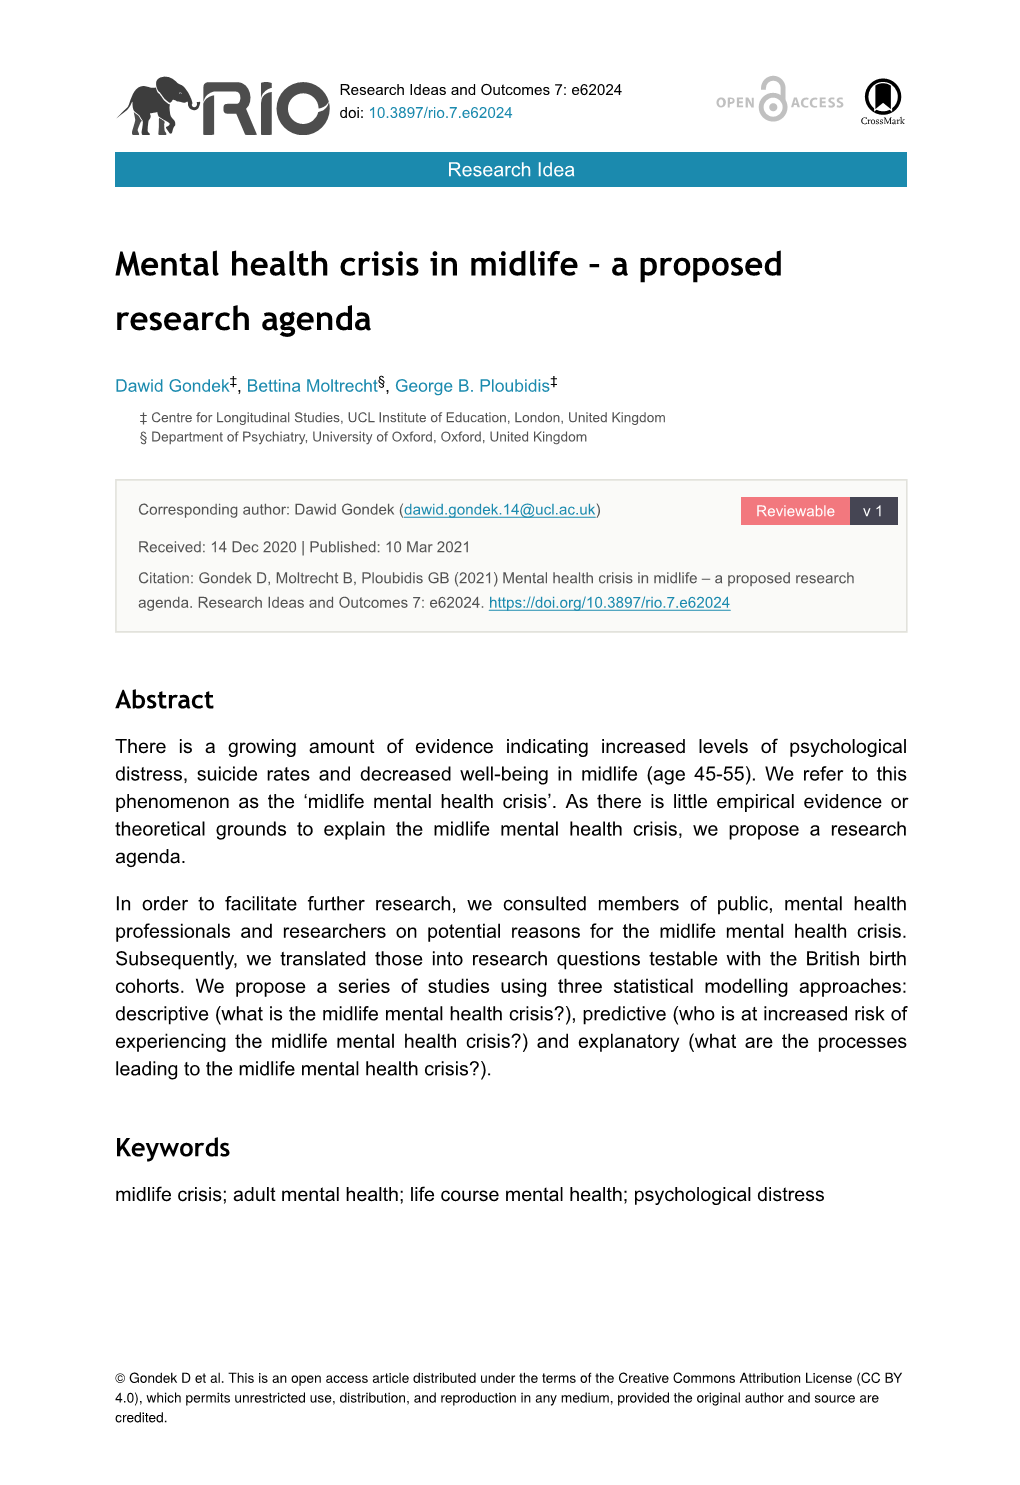 Mental Health Crisis in Midlife – a Proposed Research Agenda